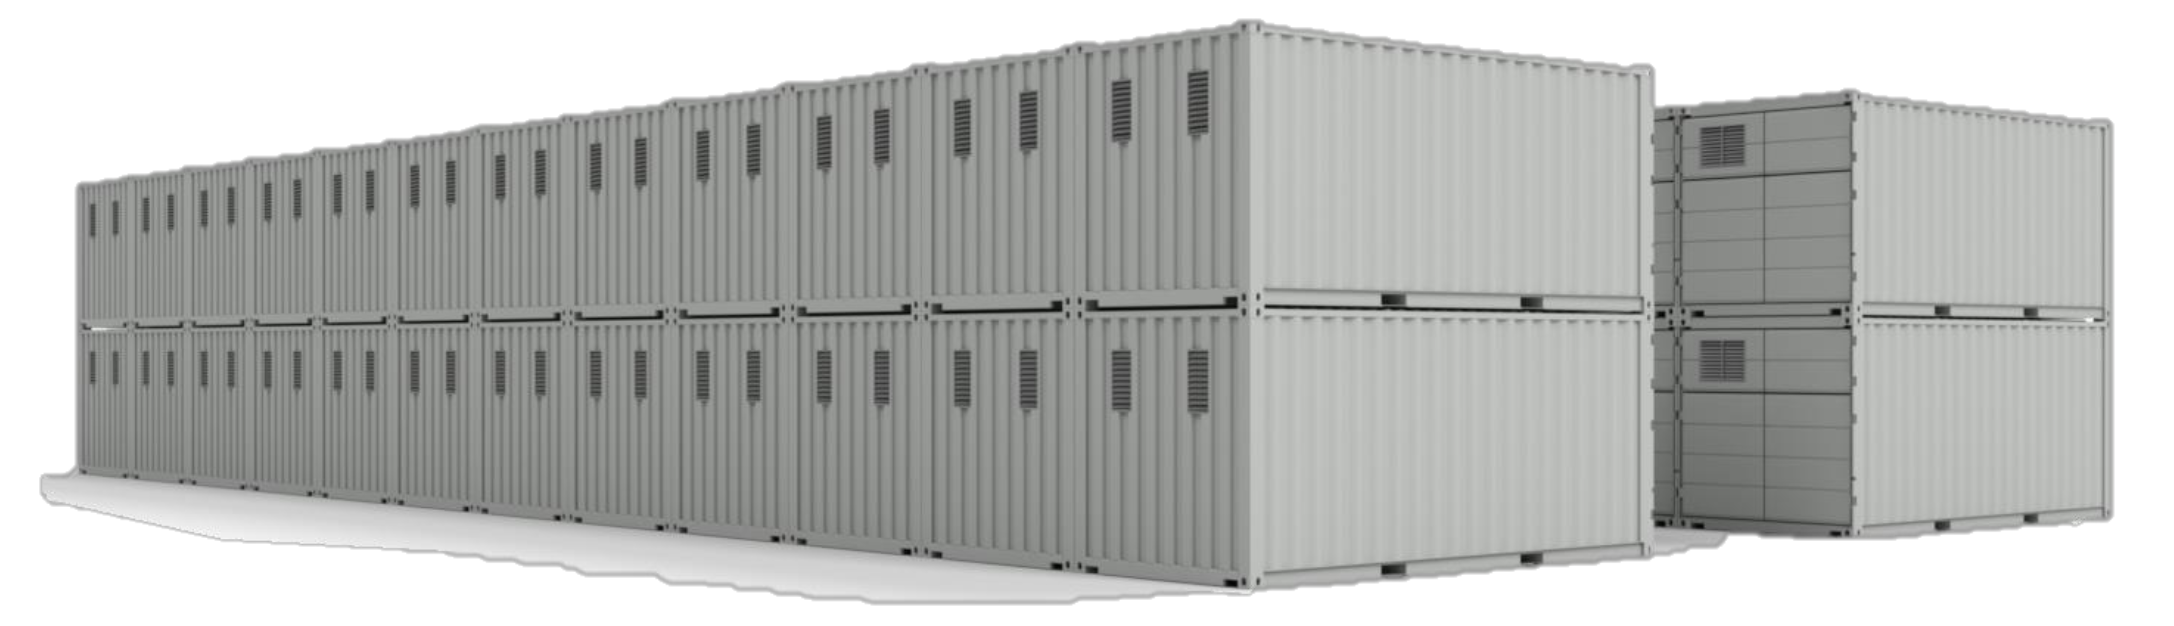 flow battery in shipping containers